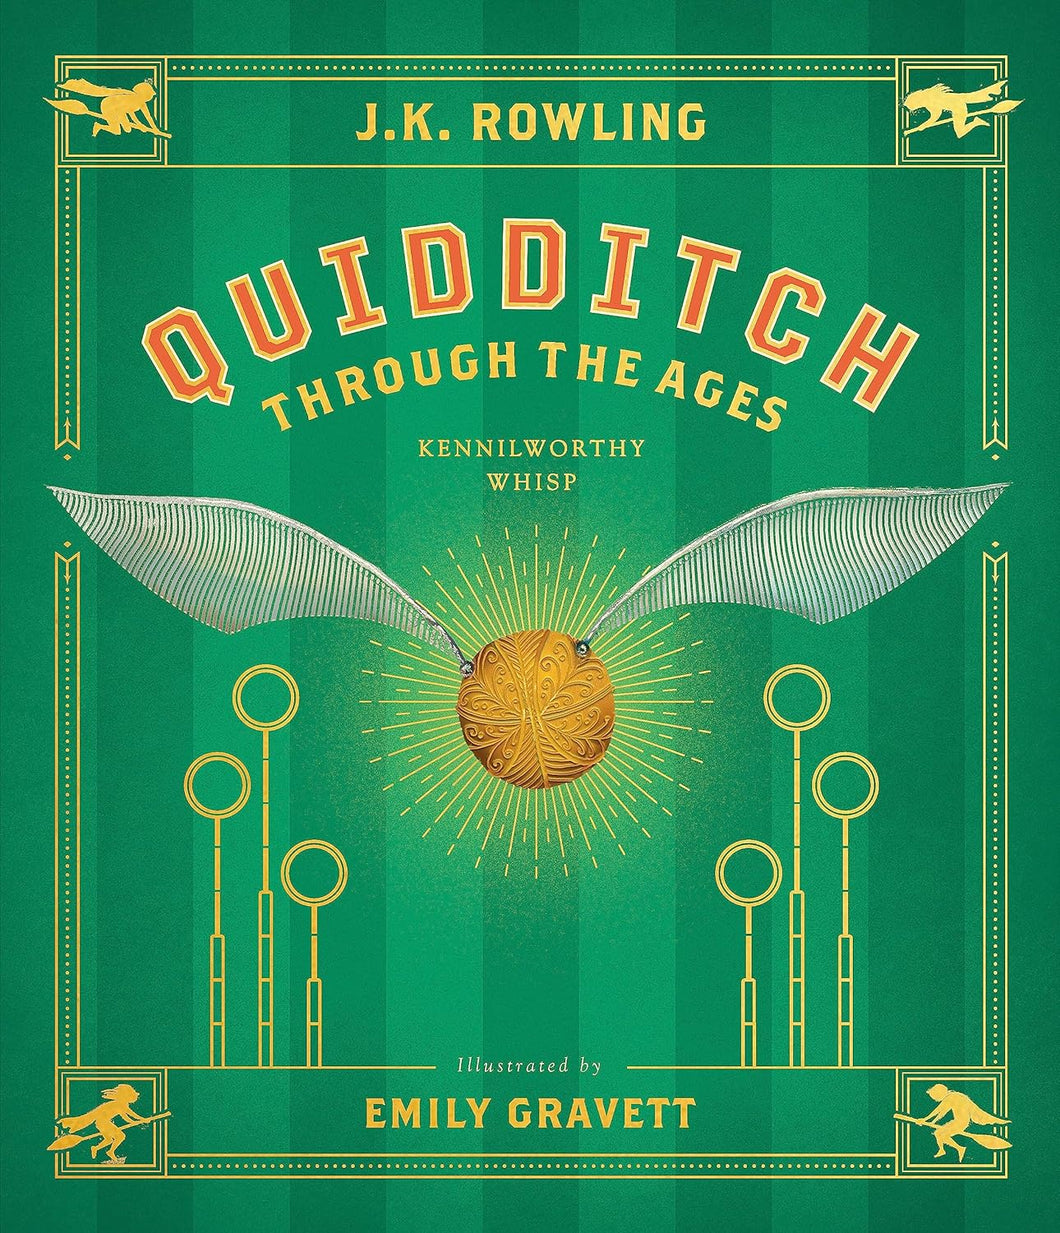 Quidditch Through the Ages: The Illustrated Edition: J.K. Rowling